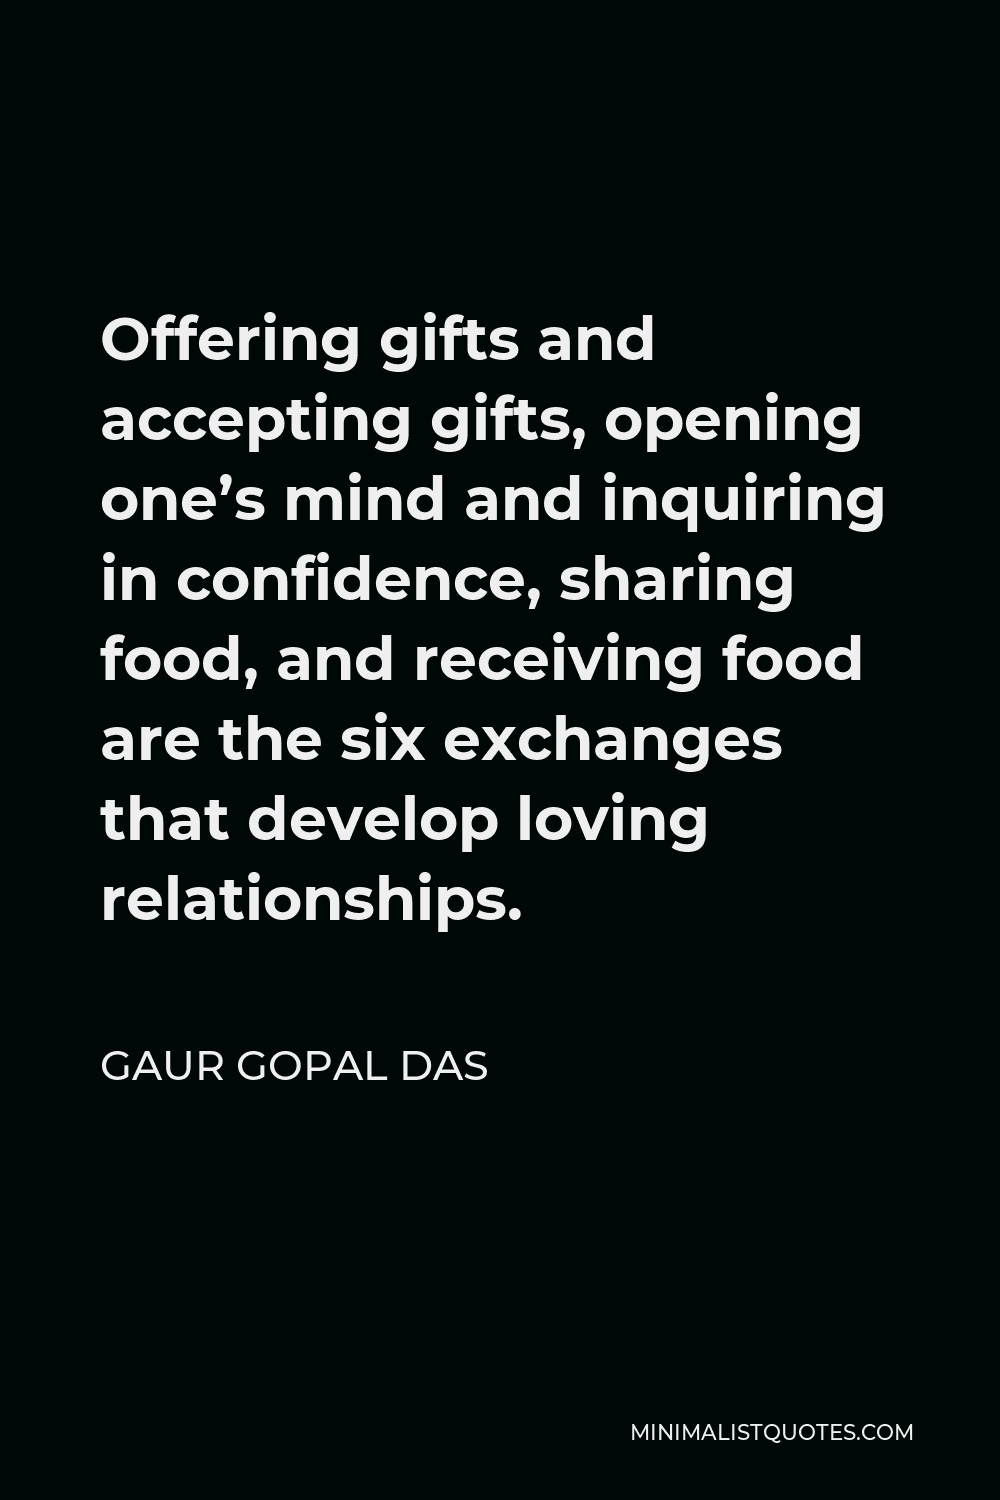 Gaur Gopal Das Quote - Offering gifts and accepting gifts, opening one’s mind and inquiring in confidence, sharing food, and receiving food are the six exchanges that develop loving relationships.